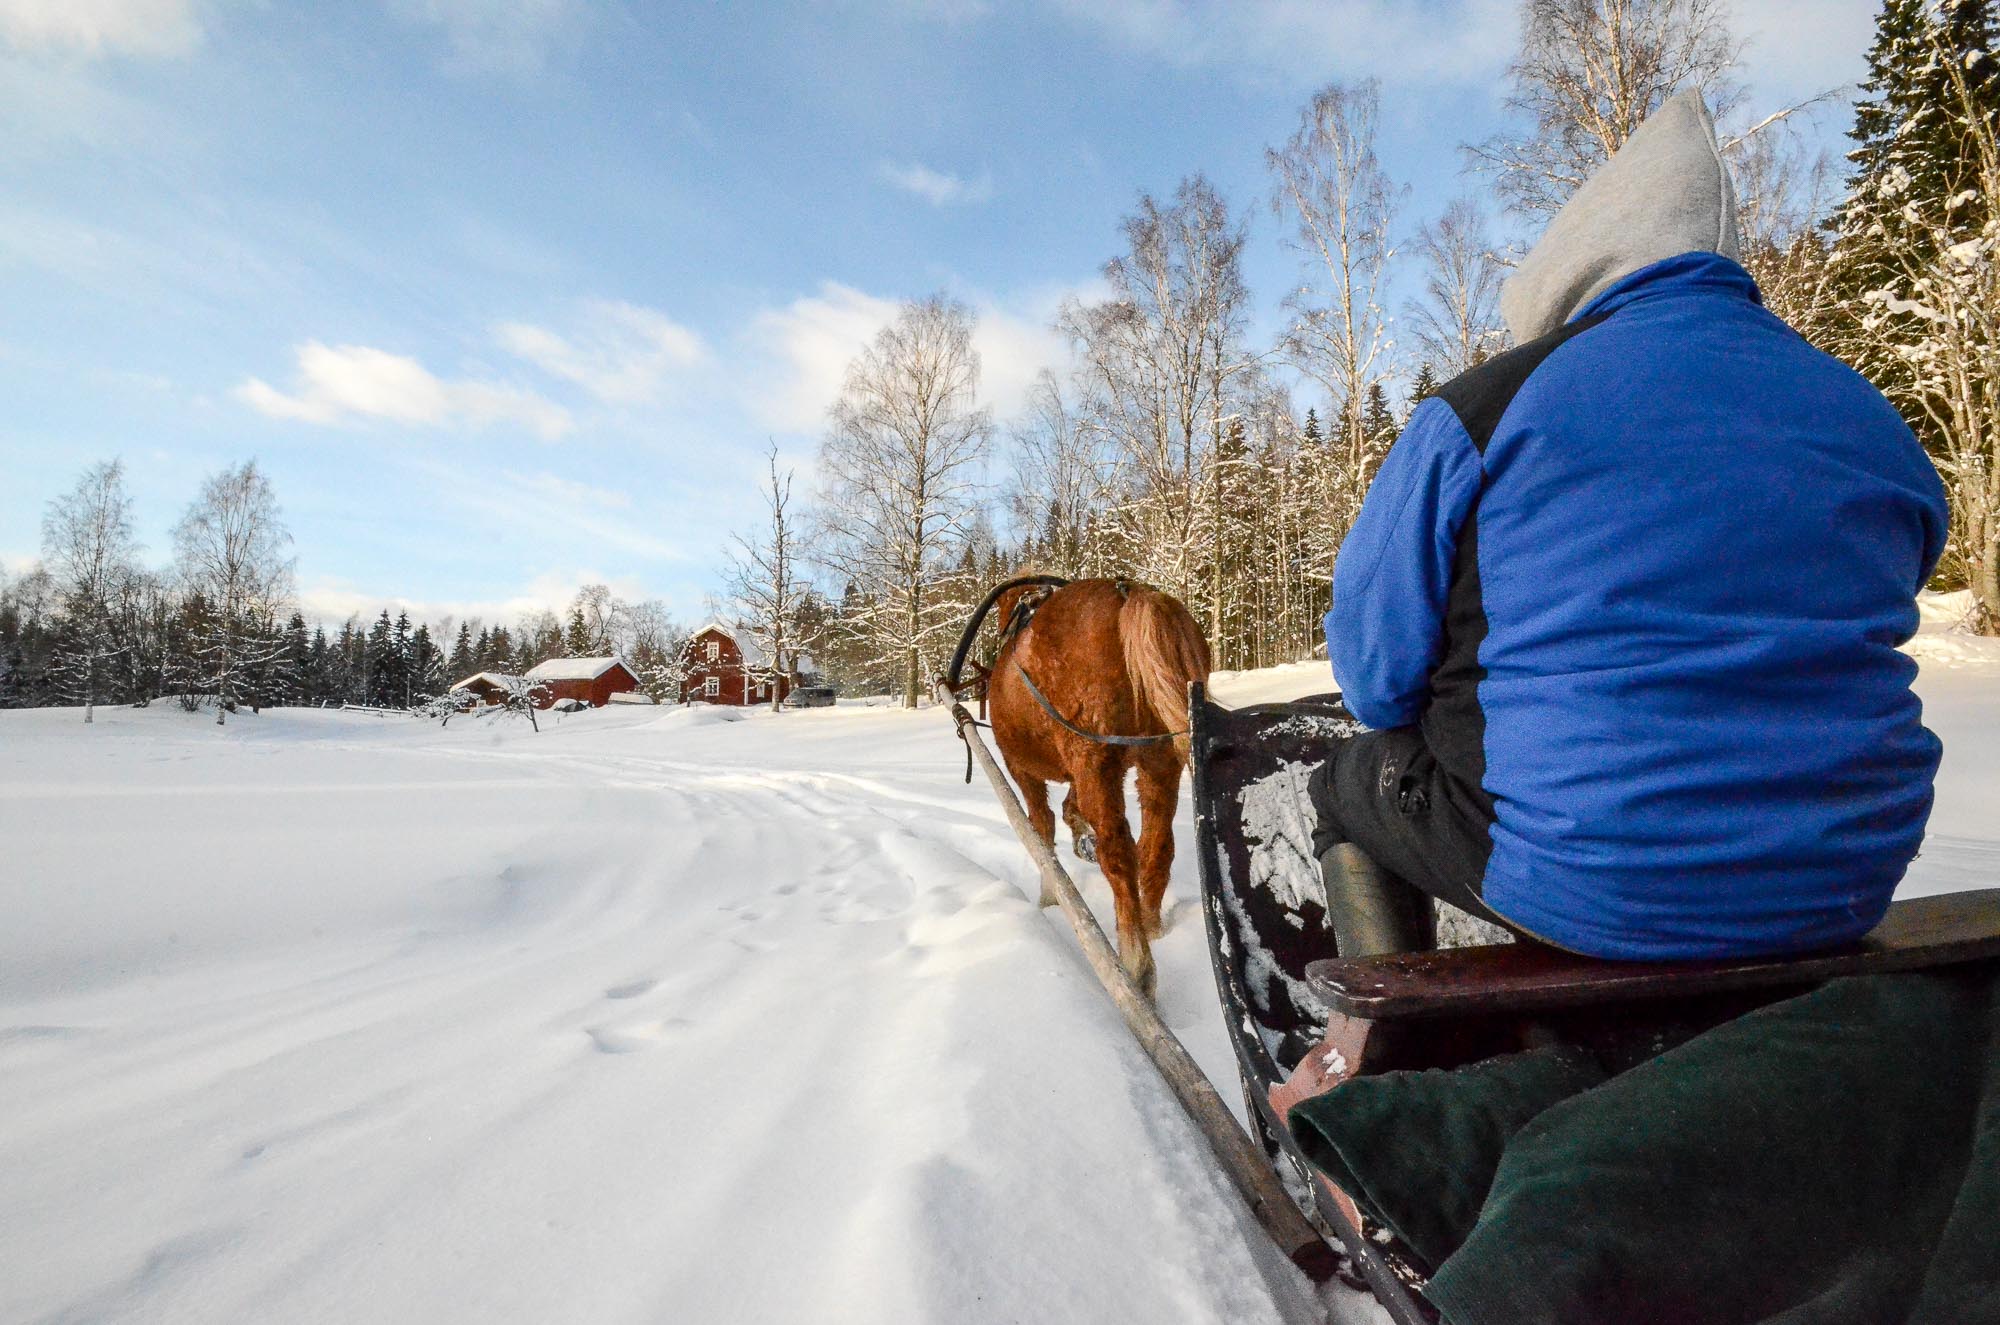 On a one-horse open sleigh at Puijo, Kuopio